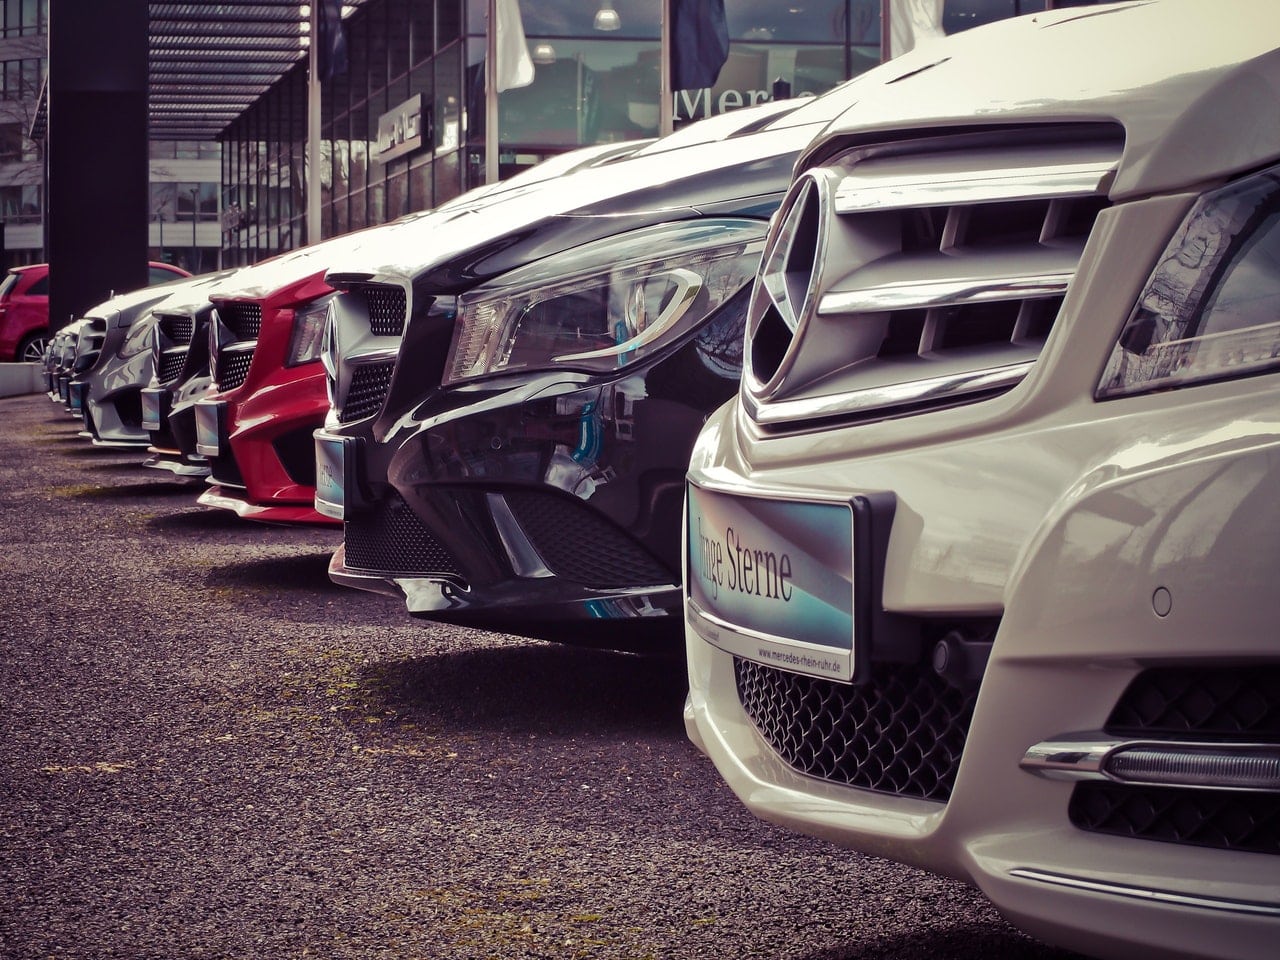 Assisting Commercial Automotive Dealers With Our Vehicle Title Services